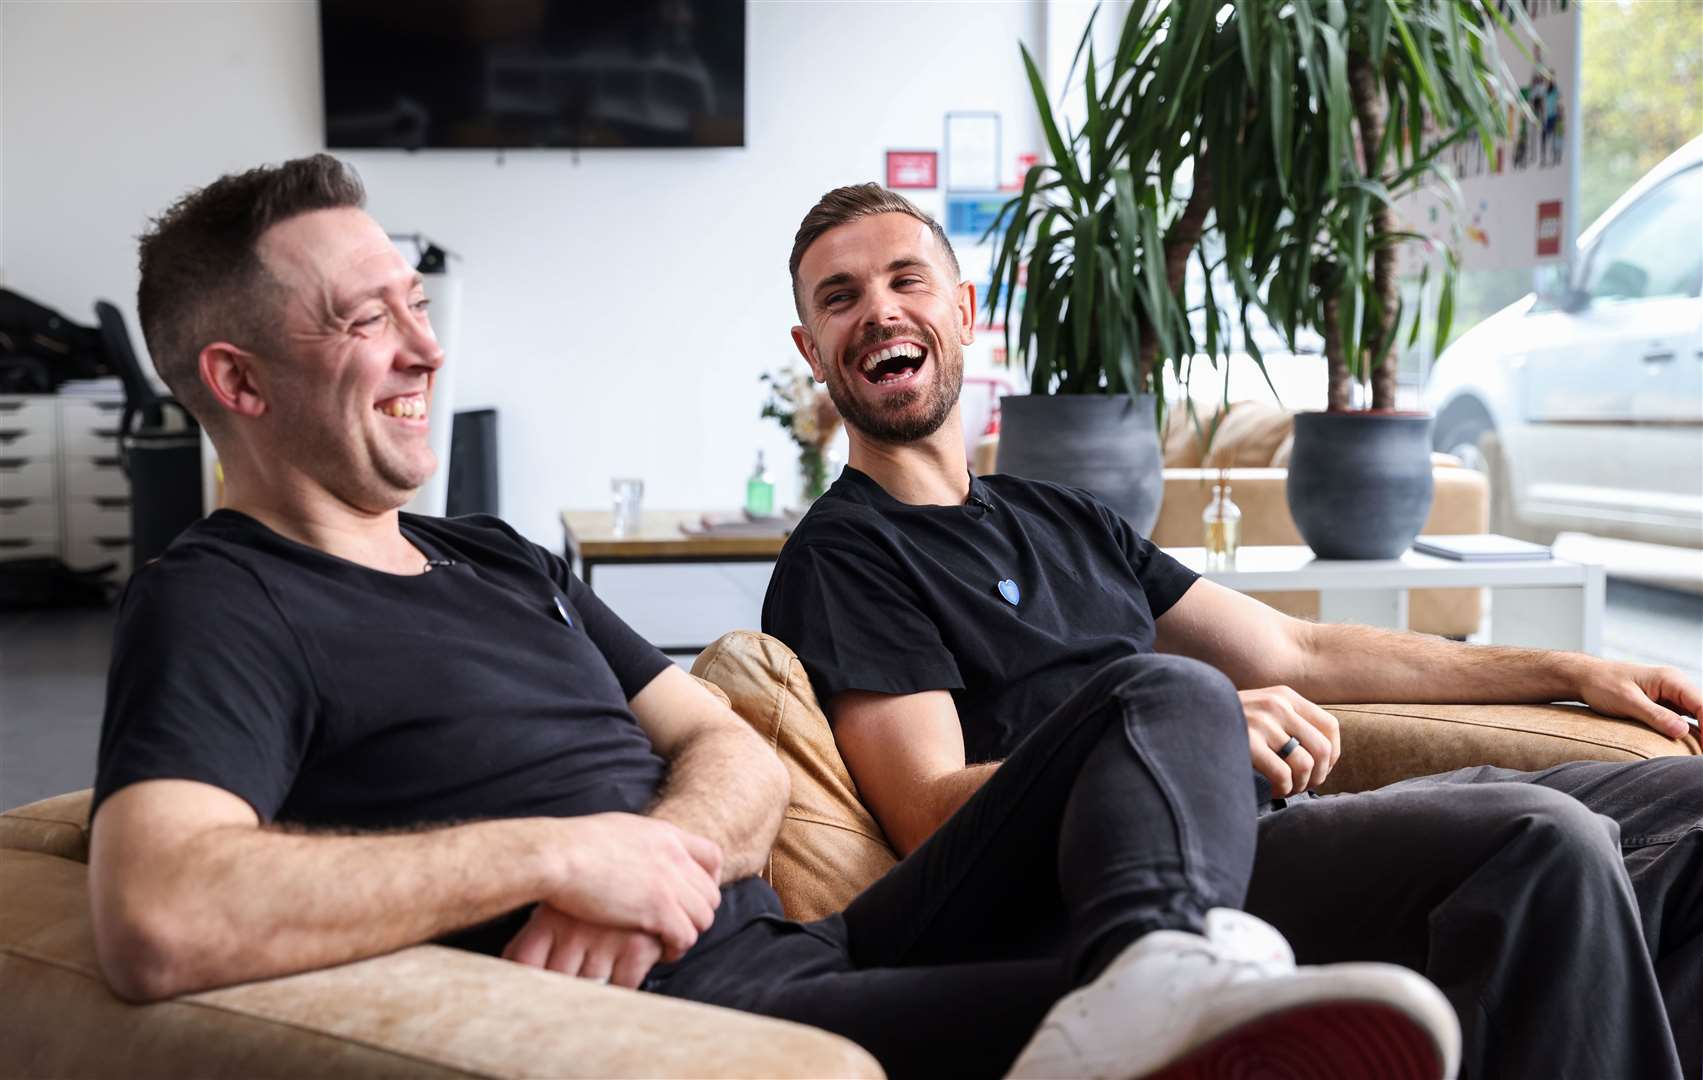 Footballer Jordan Henderson and Matt Kennard during a photoshoot with Rankin as part of a new exhibition led by NHS Charities Together (Matt Alexander/PA)